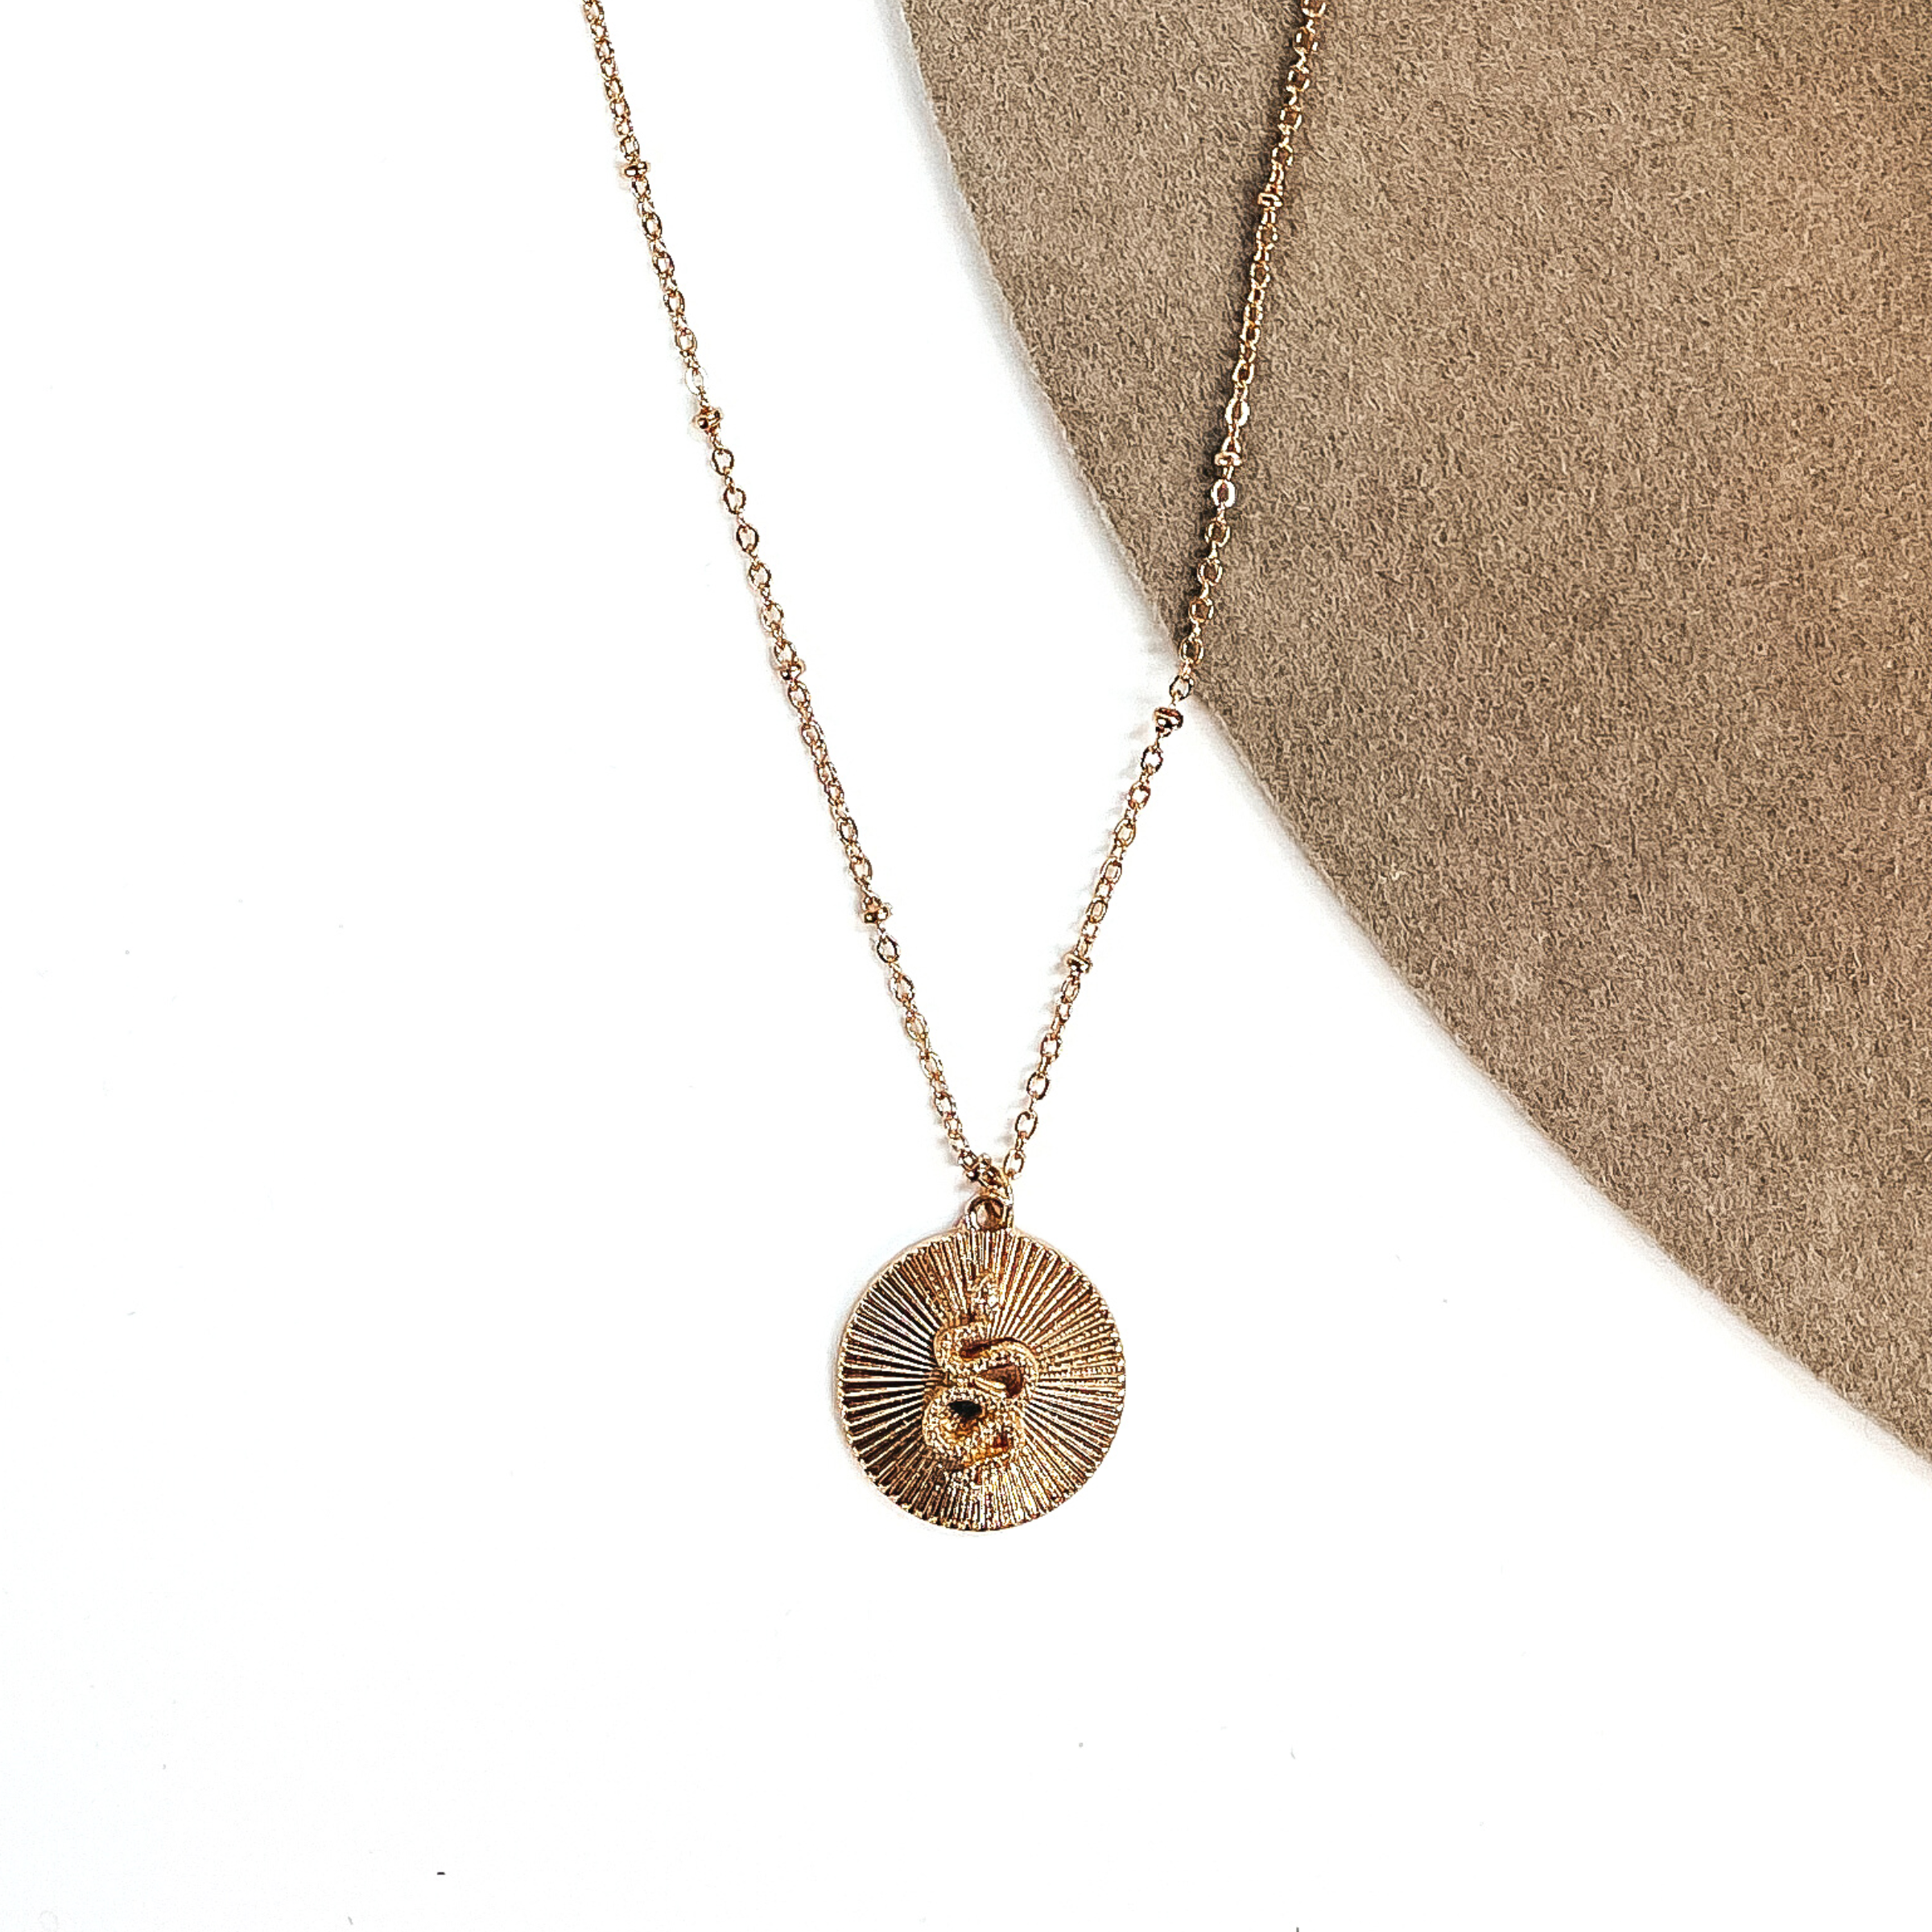 This is a small thin gold chain necklace with a small circle pendant in  textured sunburst. The pendant has a small snake in the center. This necklace  is taken on a white background and on a beige felt hat.